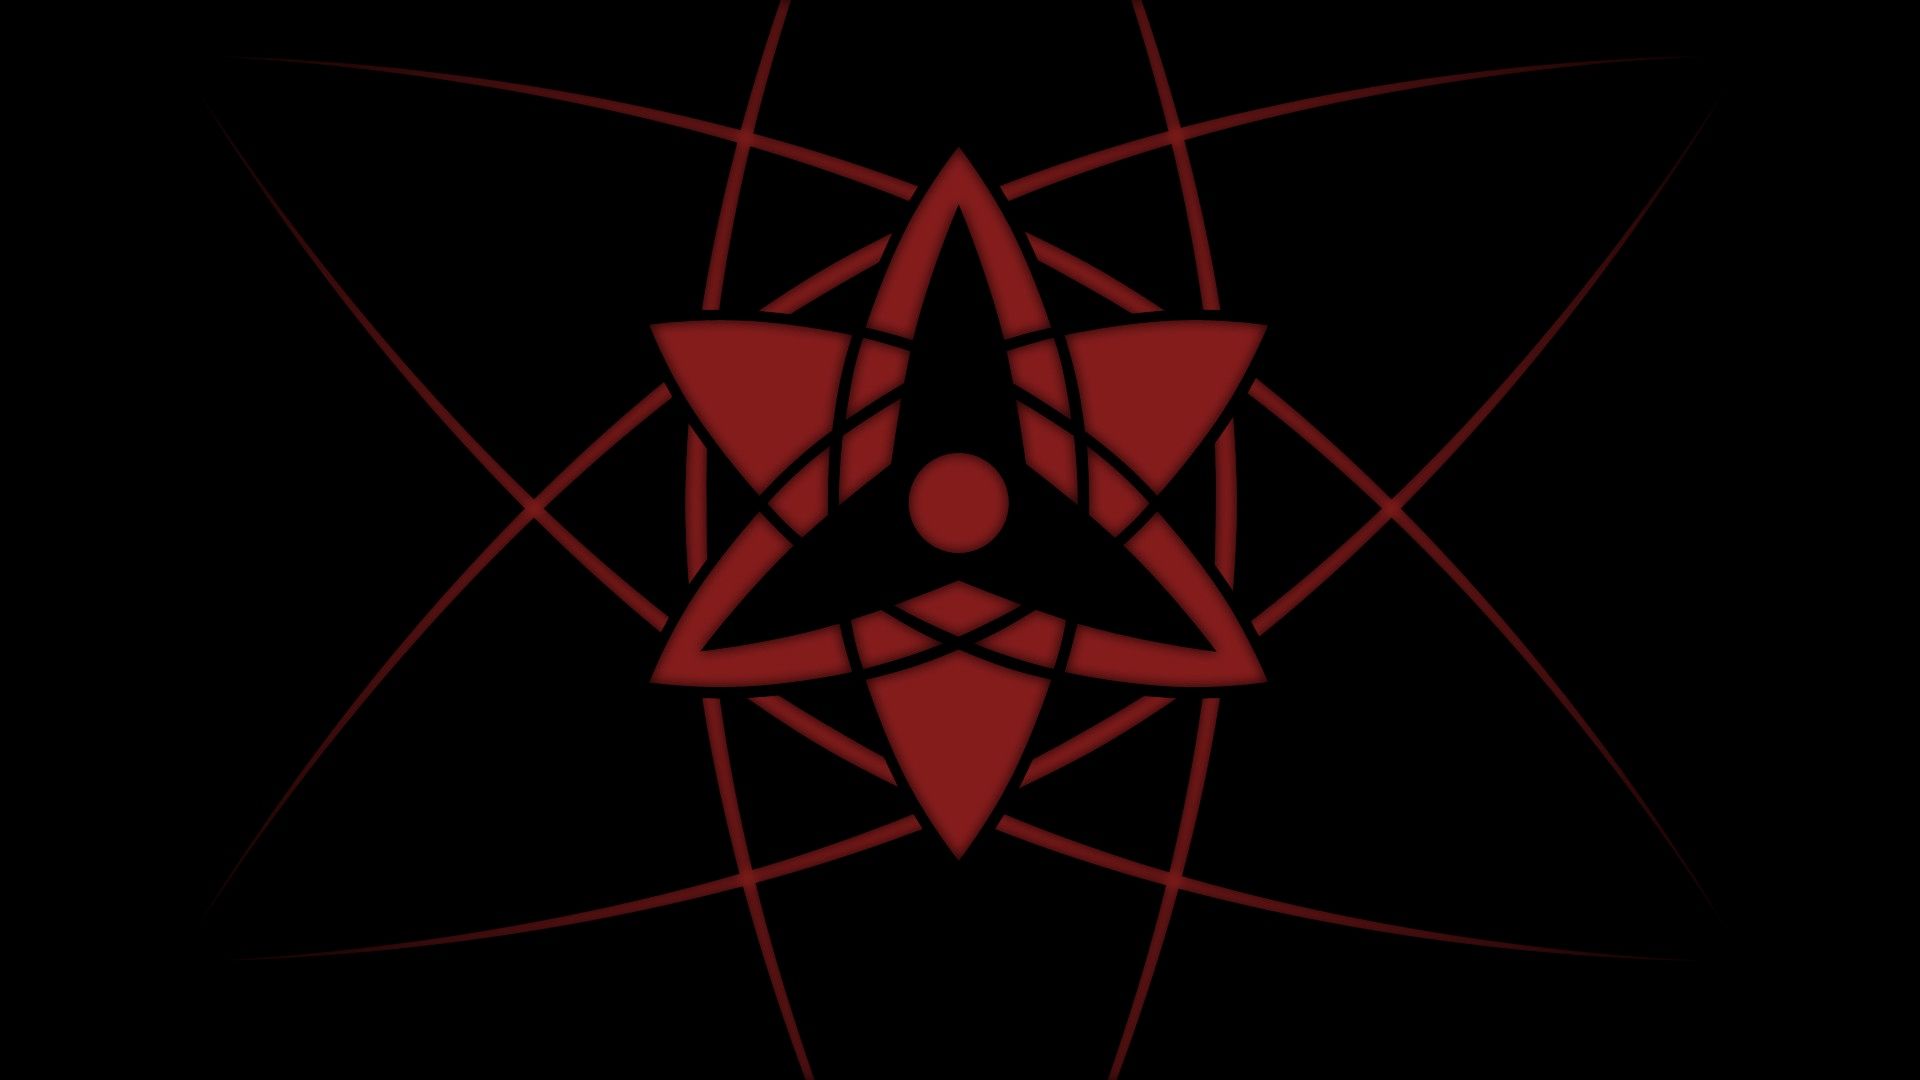 Uchiha Symbol Best Of Naruto What is the Symbol Of the Uchiha Clan Supposed to Be Anime & Manga Stack Exchange 2019 of The Hudson